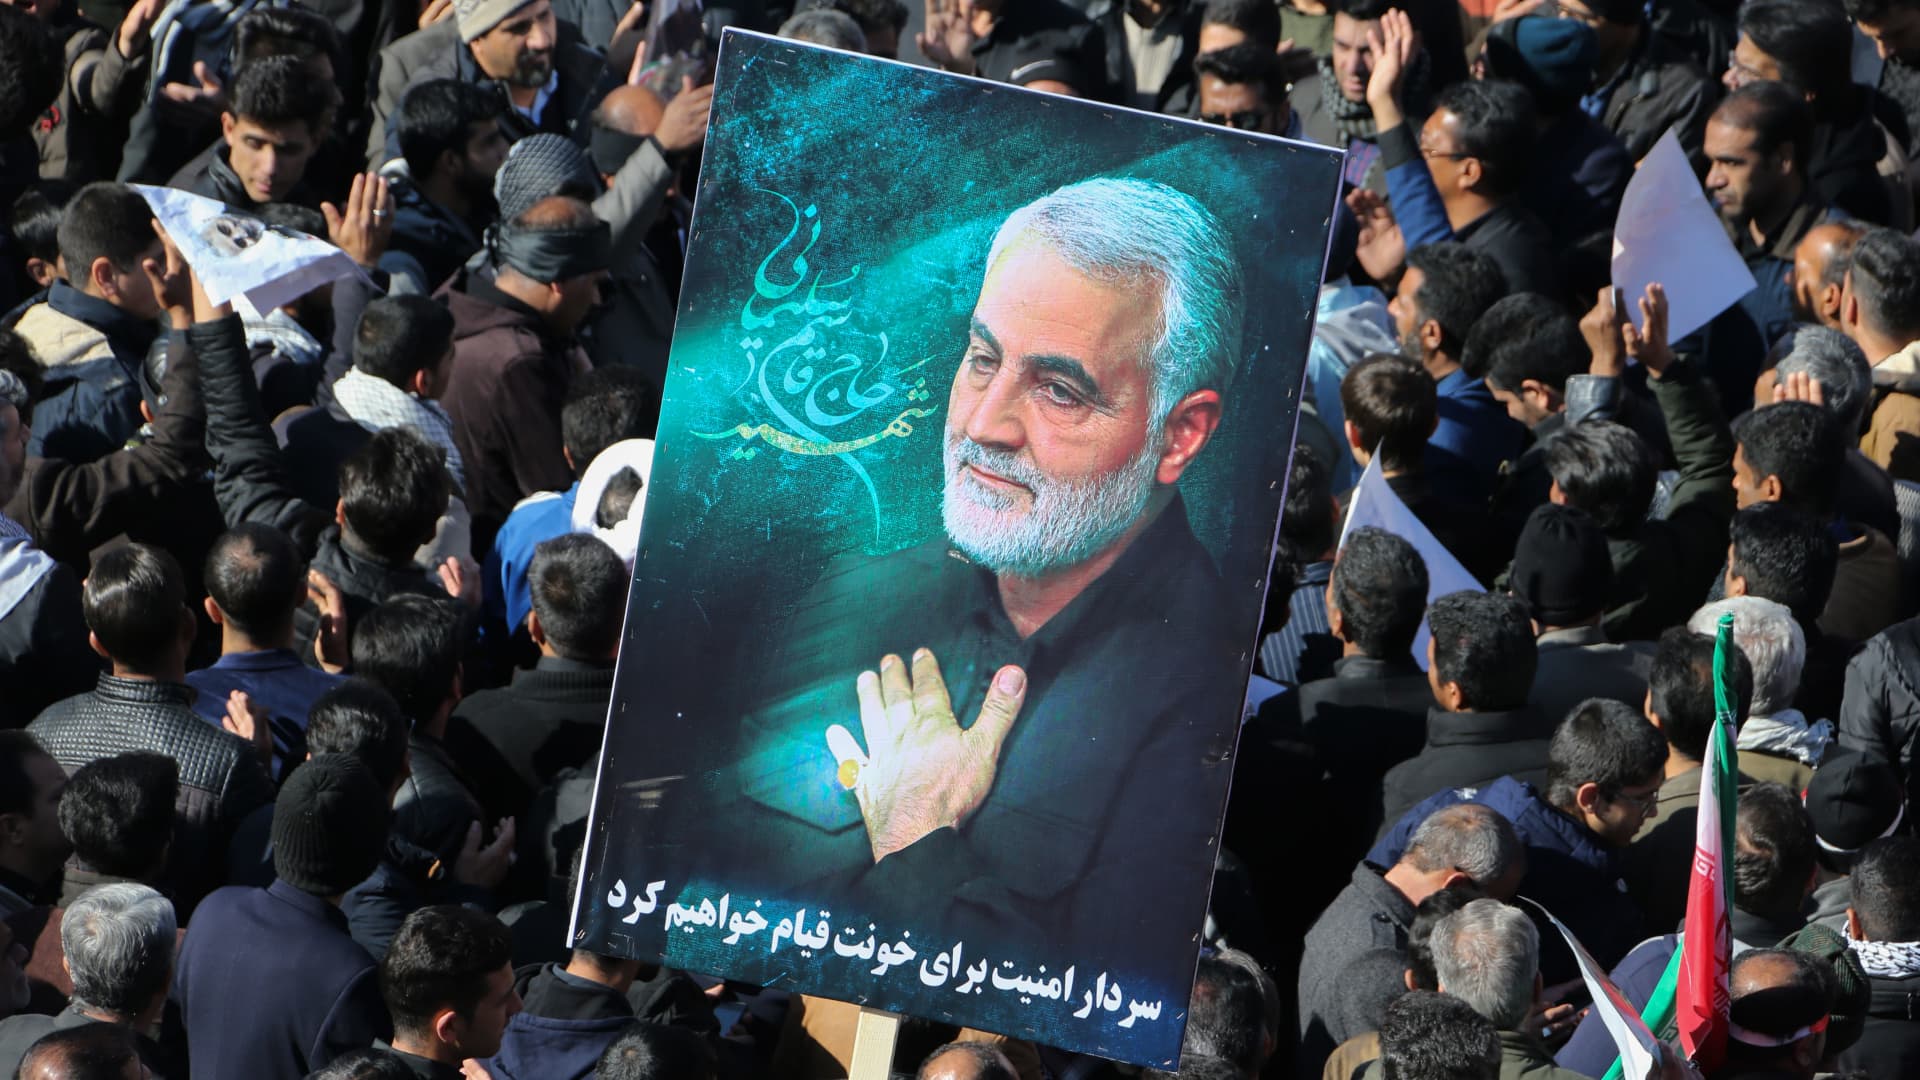 Iranian mourners gather during the final stage of funeral processions for slain top general Qasem Soleimani, in his hometown Kerman on January 7, 2020.